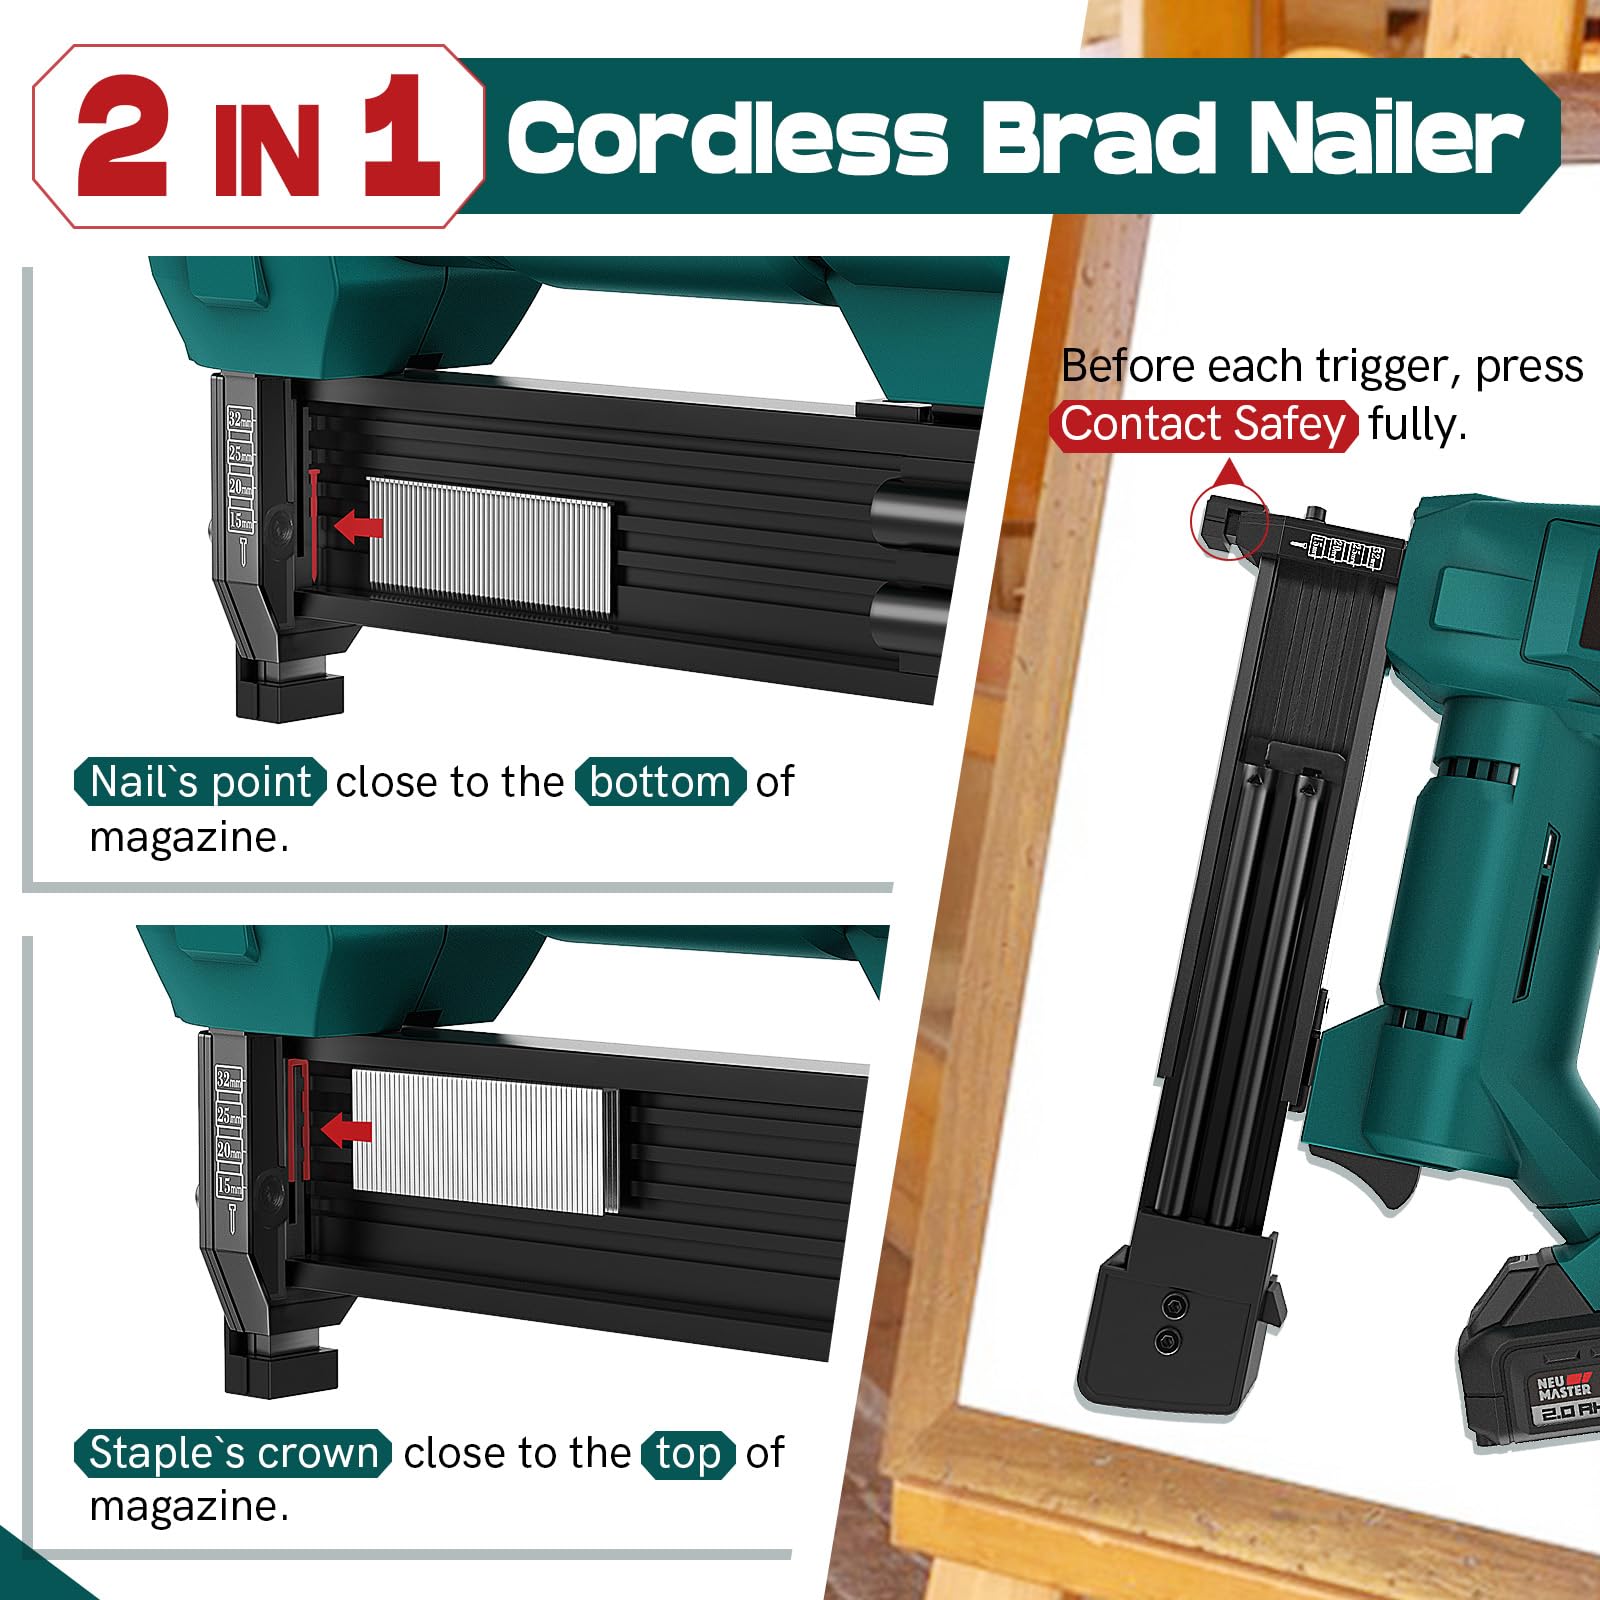 Cordless Nail Gun Battery Powered, NEU MASTER Battery Brad Nailer/Staple Gun NTC0023, 20V Max. 2.0Ah Battery and Charger Included for Upholstery, Woodworking and Carpentry